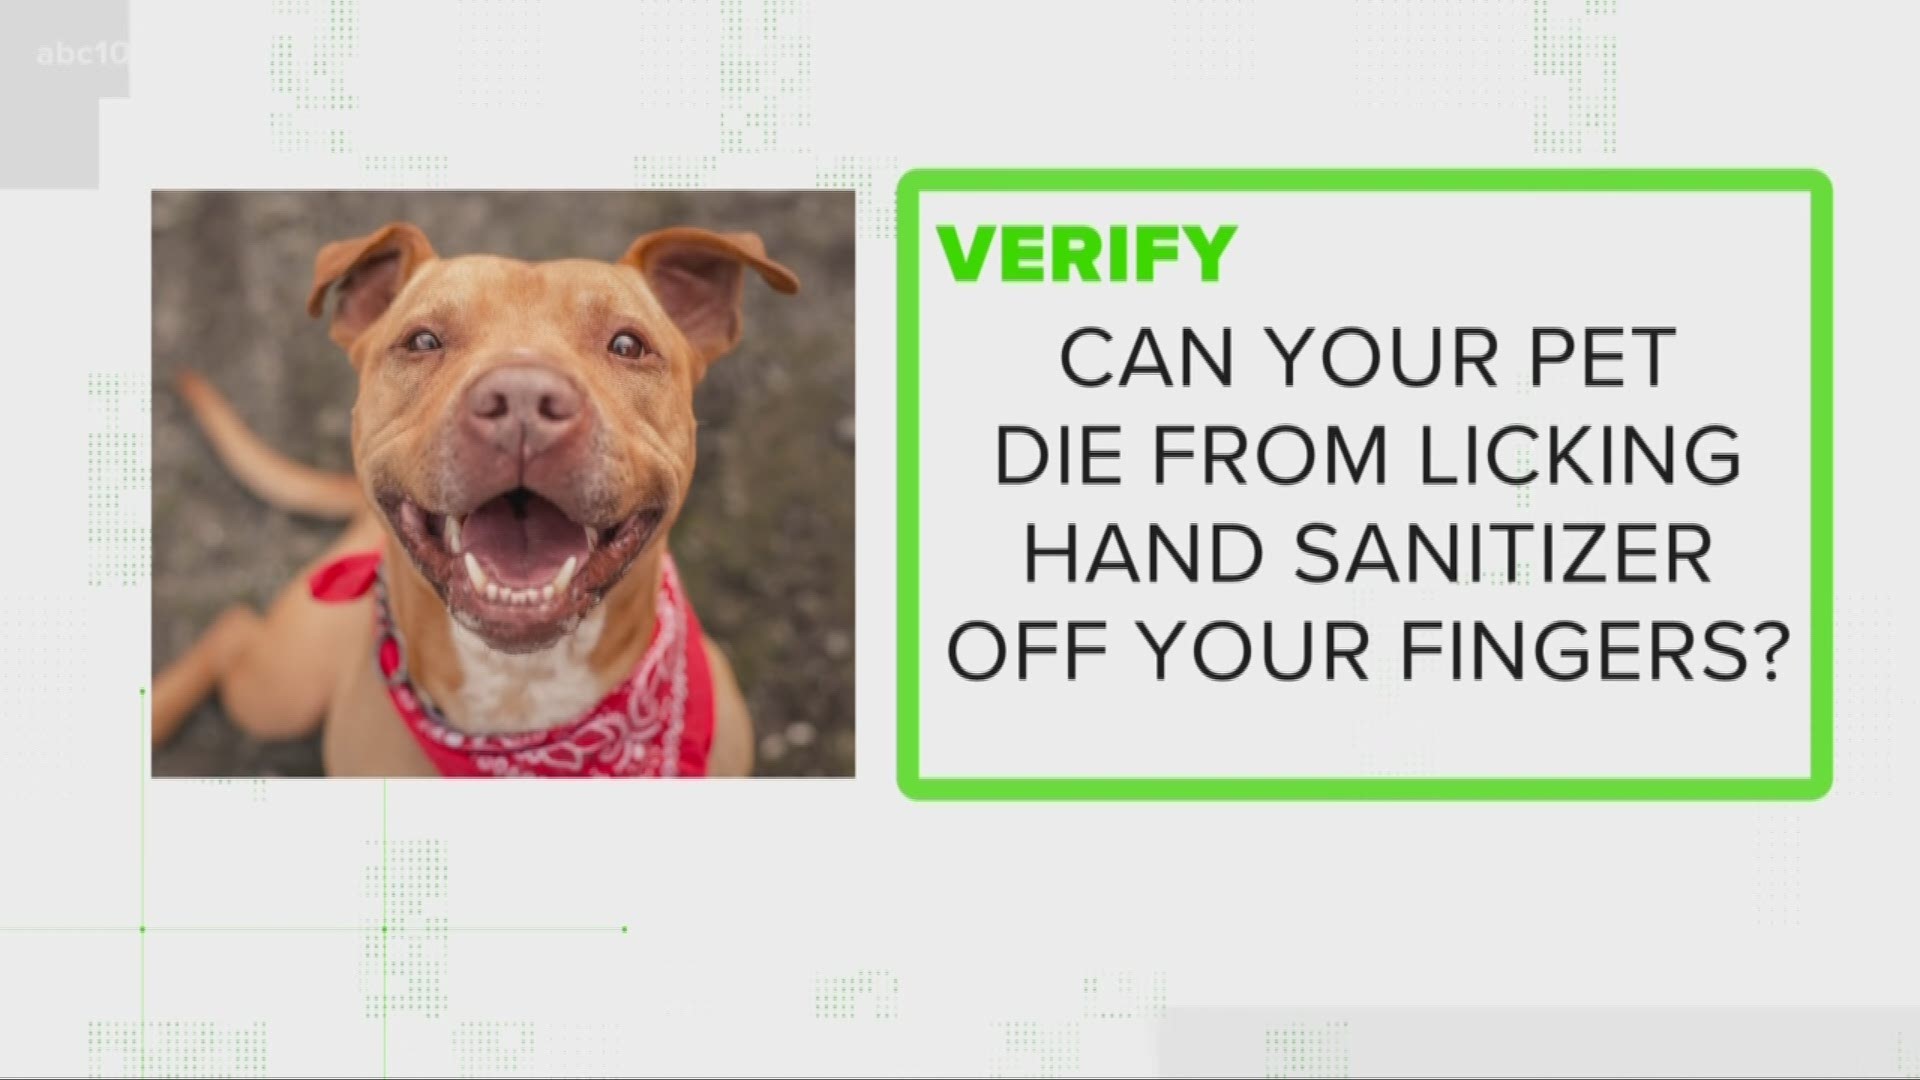 Can your pet die from licking hand sanitizer off your fingers? Carley digs into this rumor in today's VERIFY.